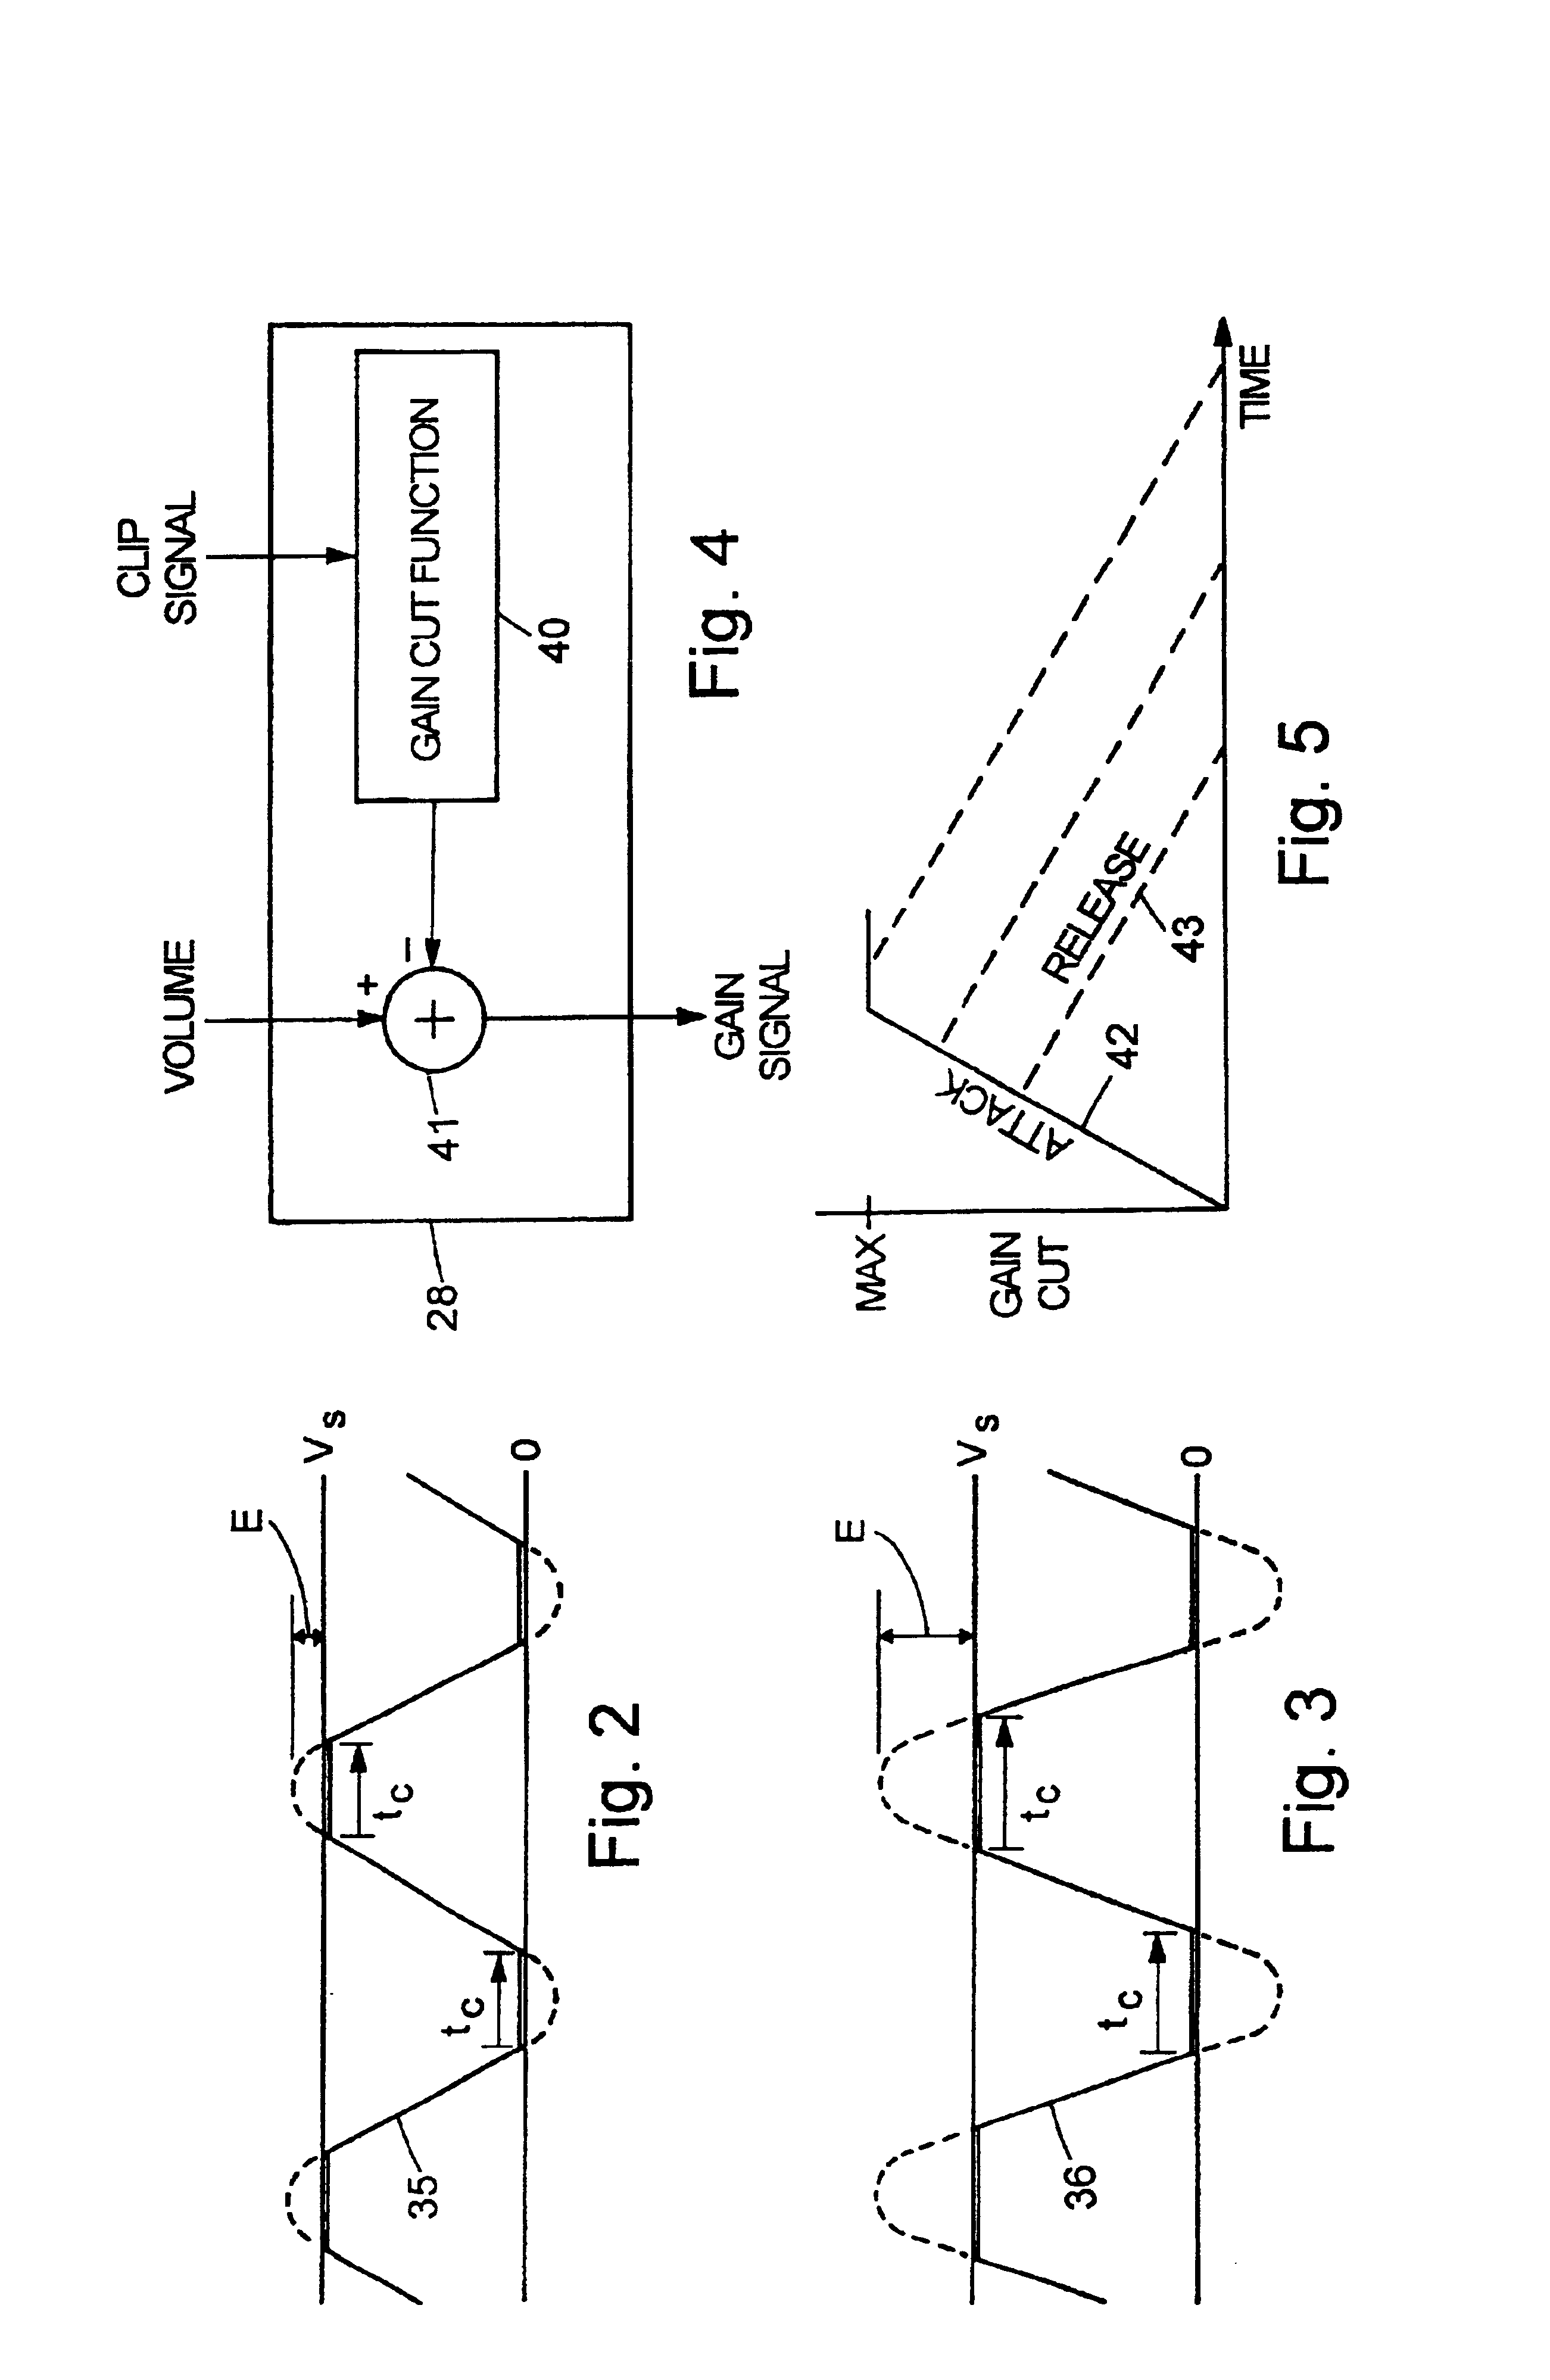 Audio amplifier with voltage limiting in response to spectral content